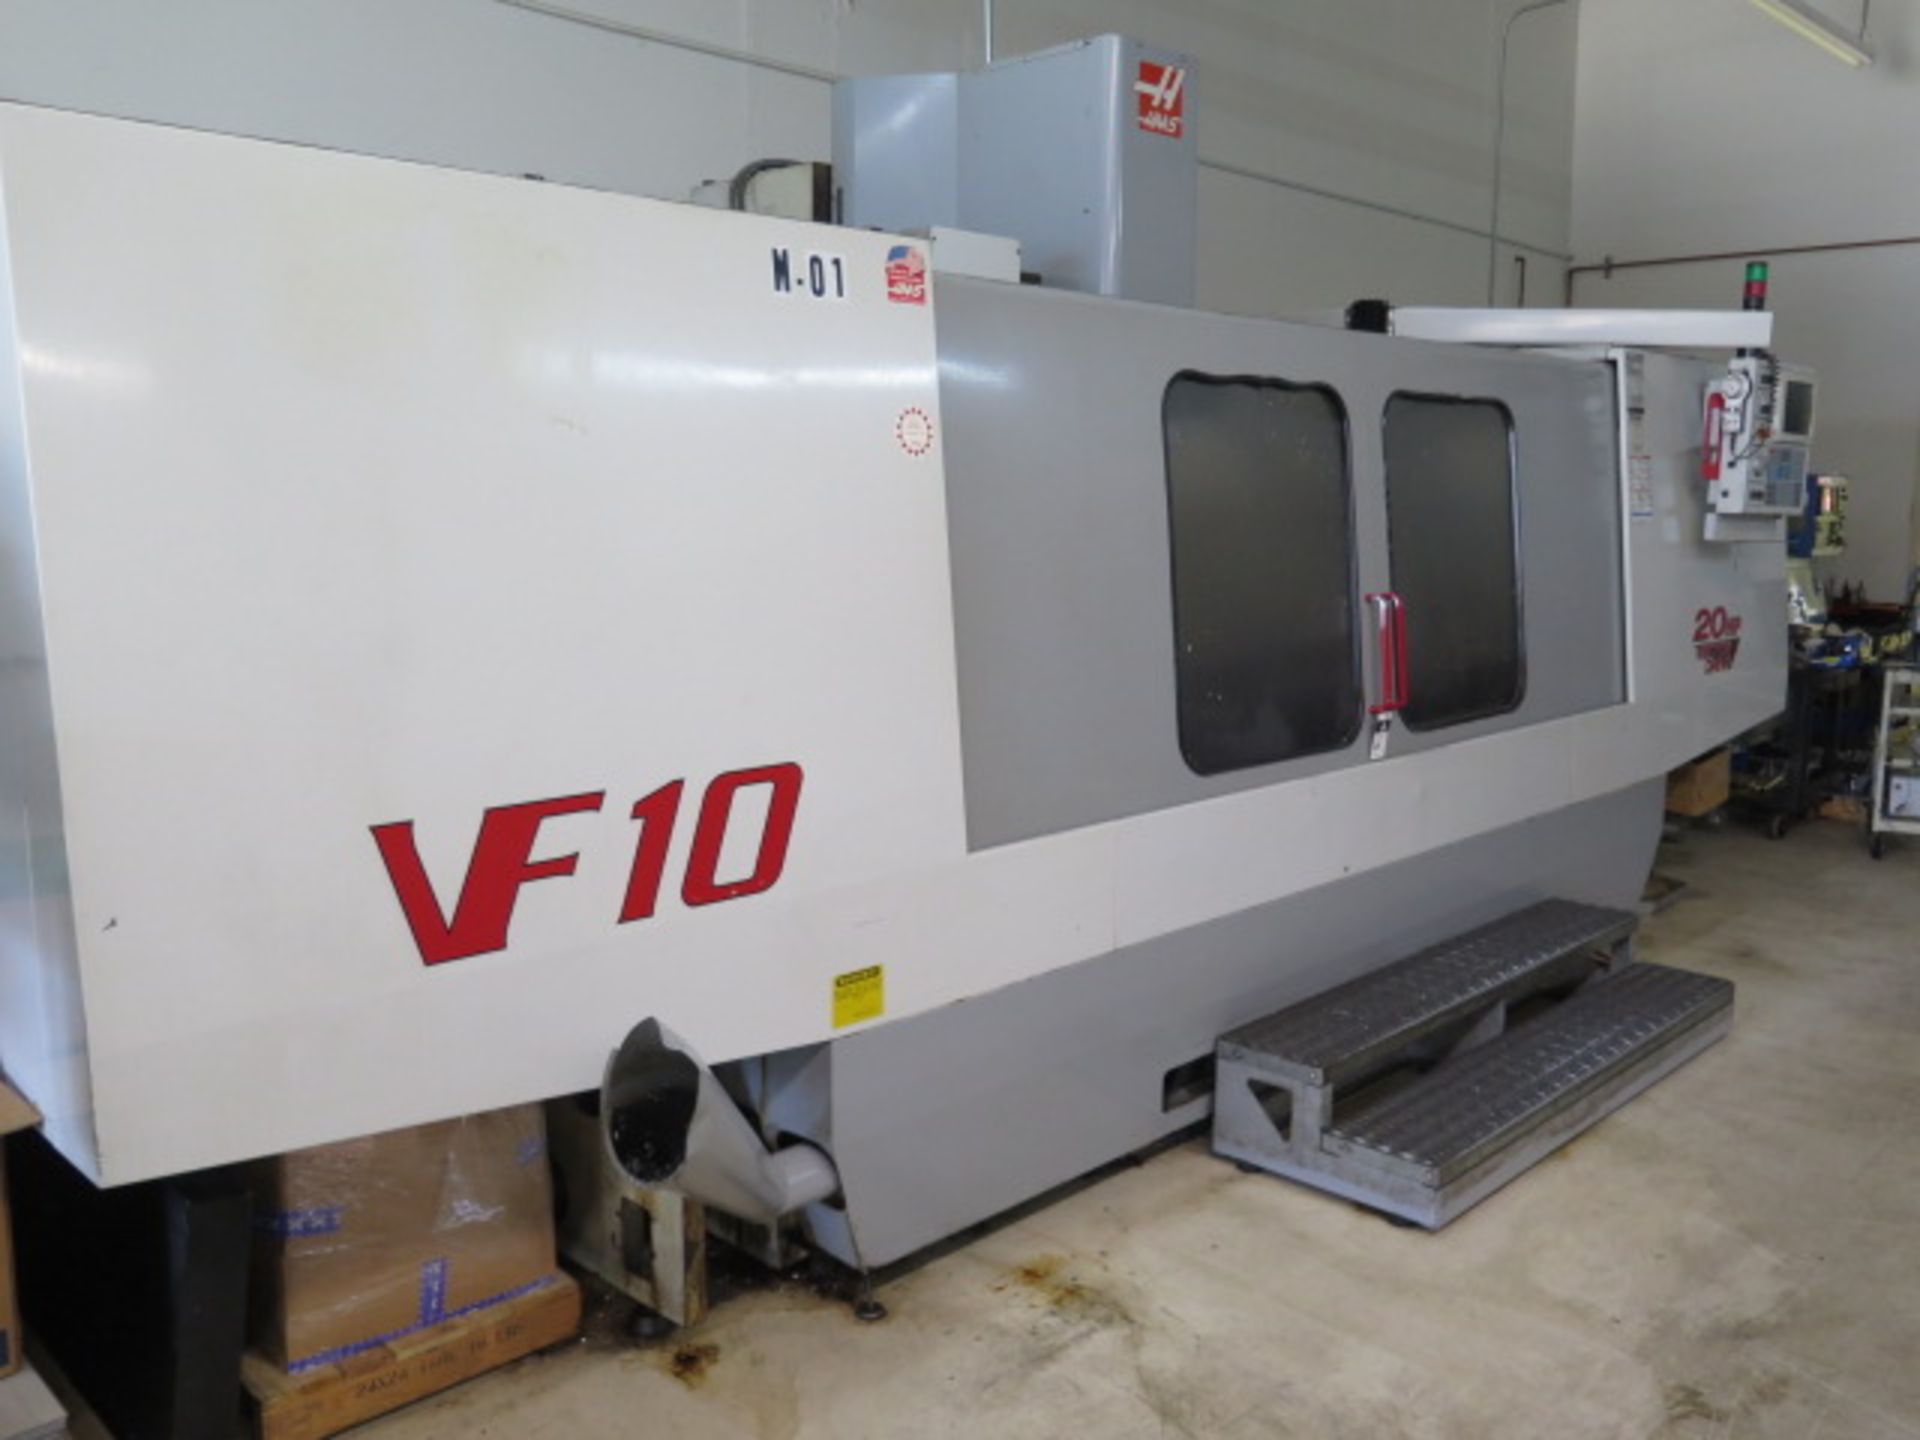 1999 Haas VF-10 4-Axis CNC VMC s/n 18845 w/ Haas Controls, Hand Wheel, 20-ATC, SOLD AS IS - Image 3 of 19